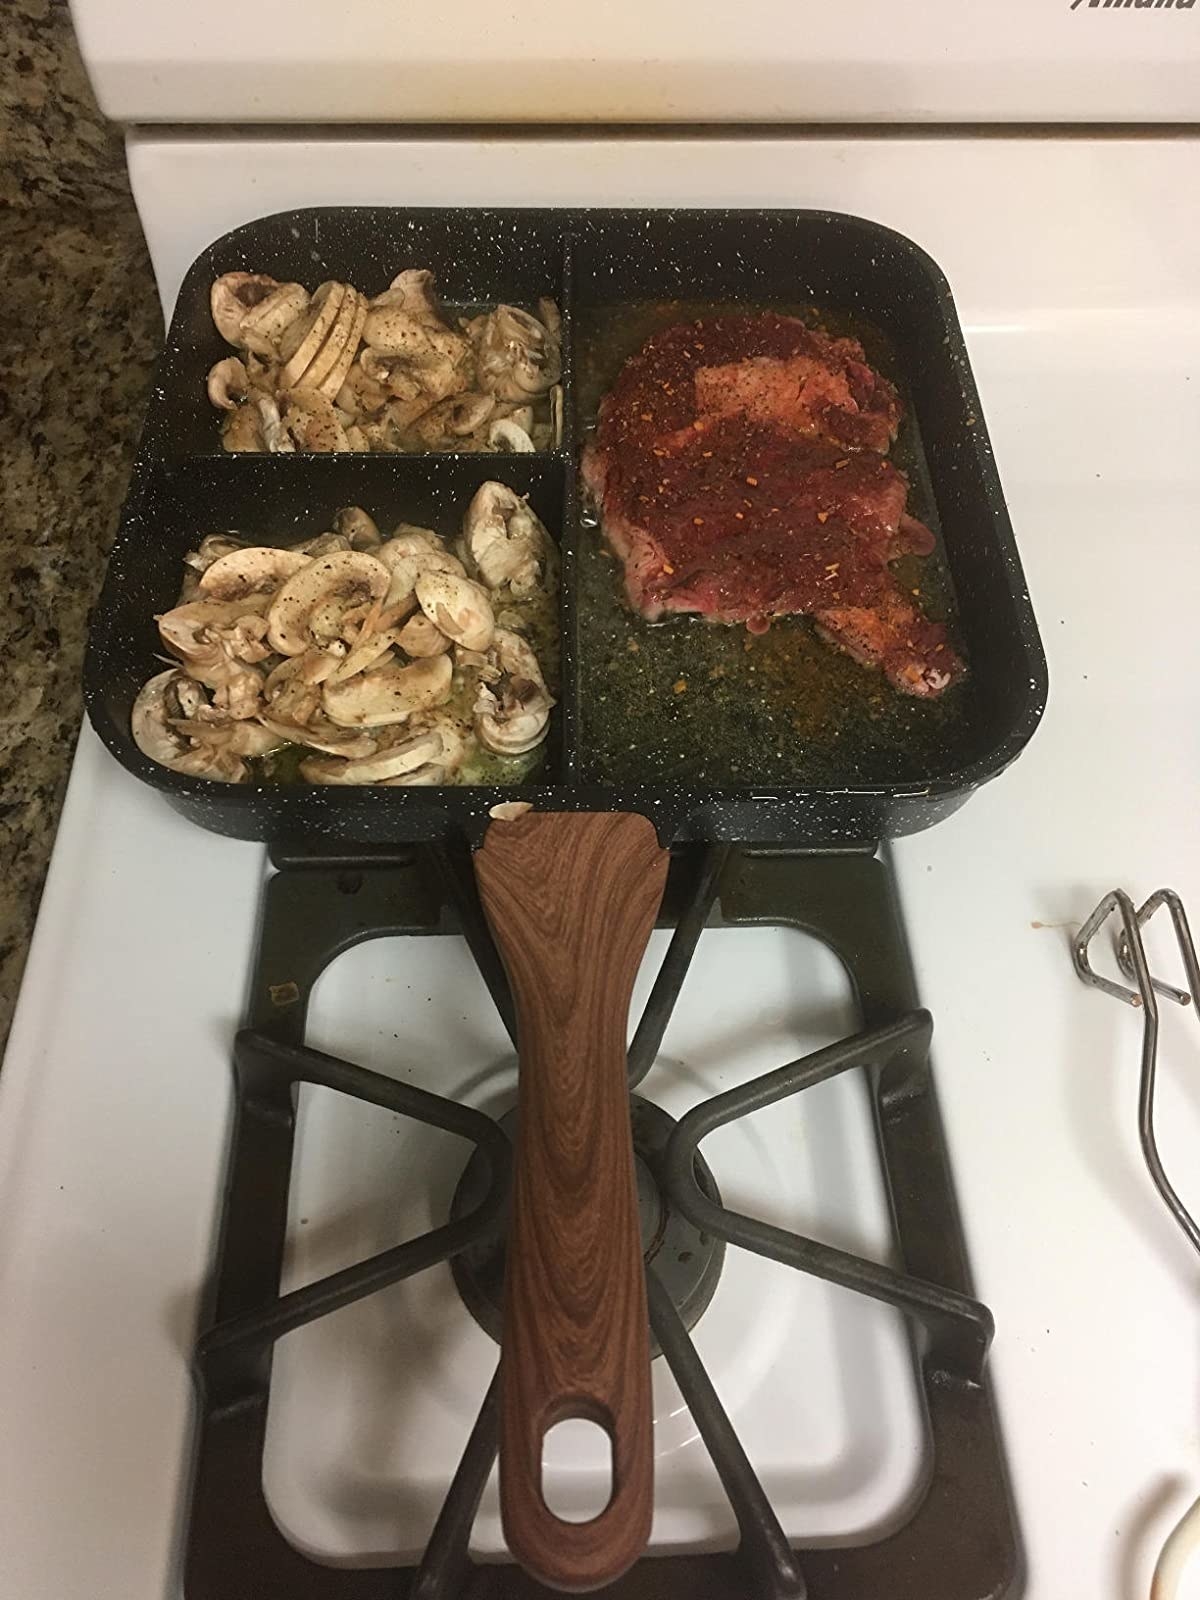 Reviewer sectioned pan in use on stove cooking meat and mushrooms